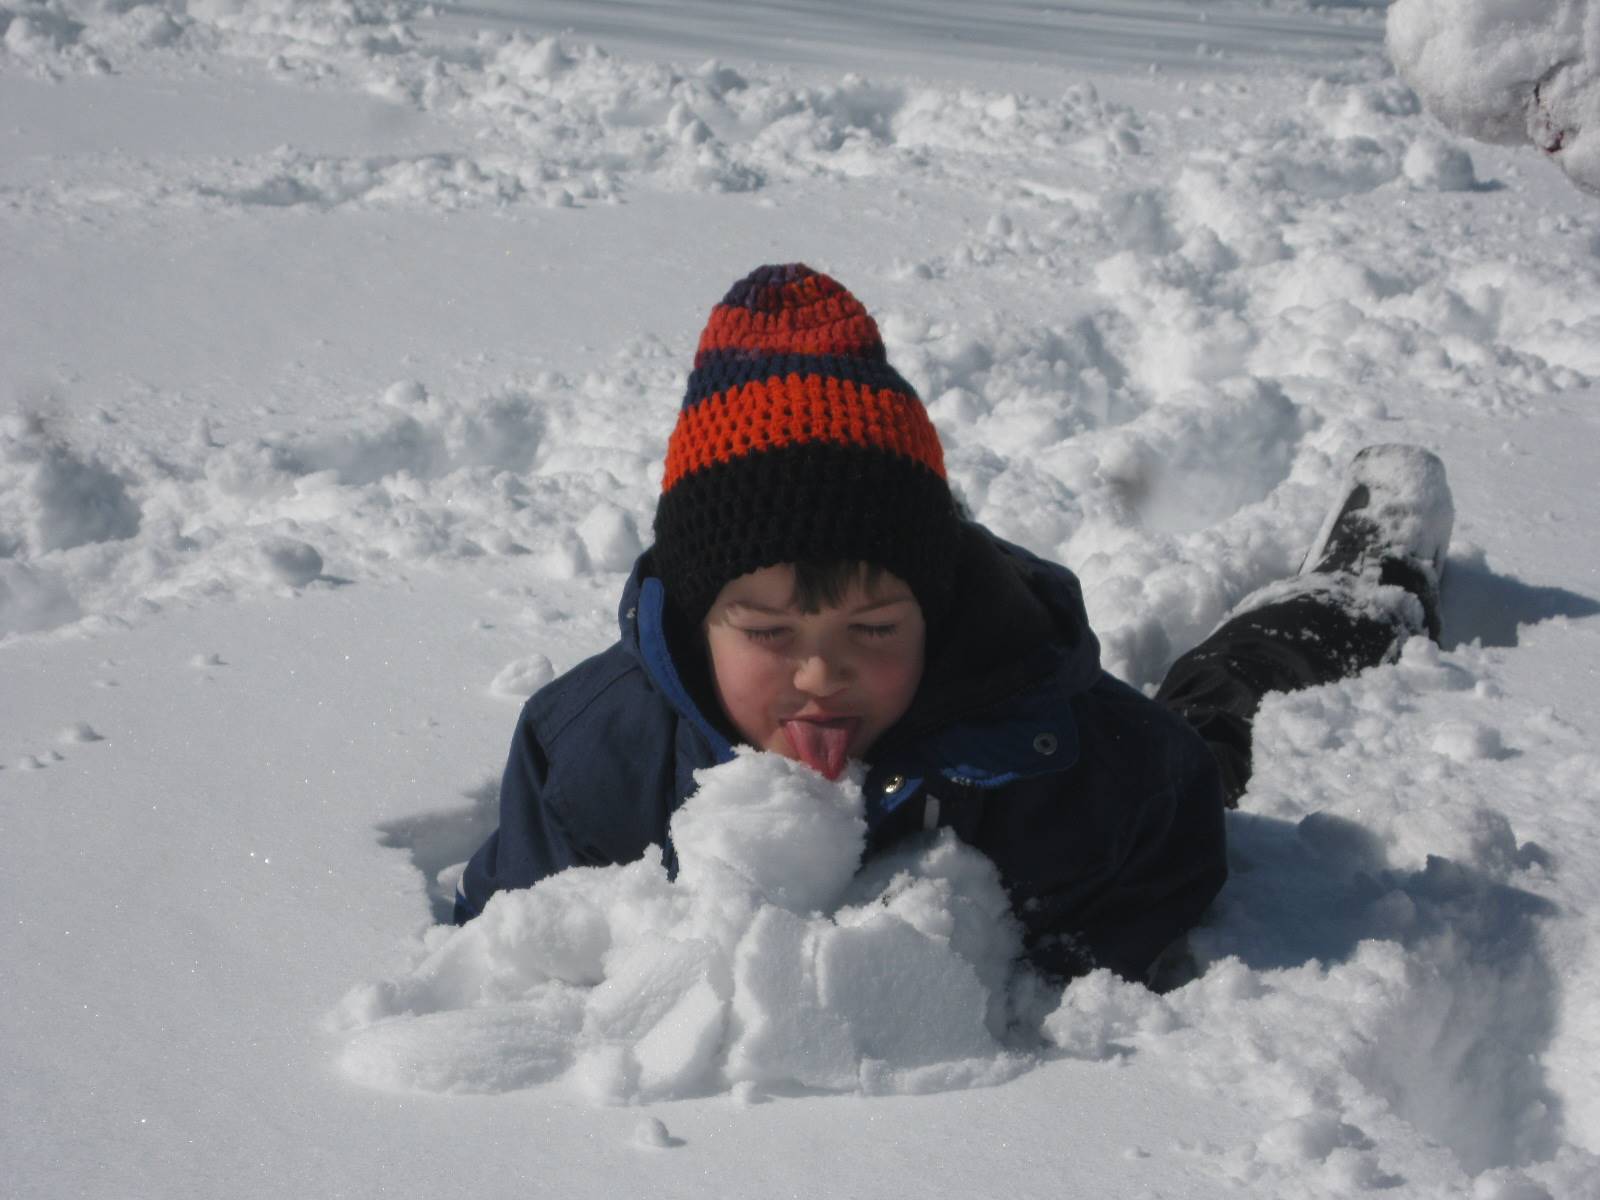 Child is licking snow.